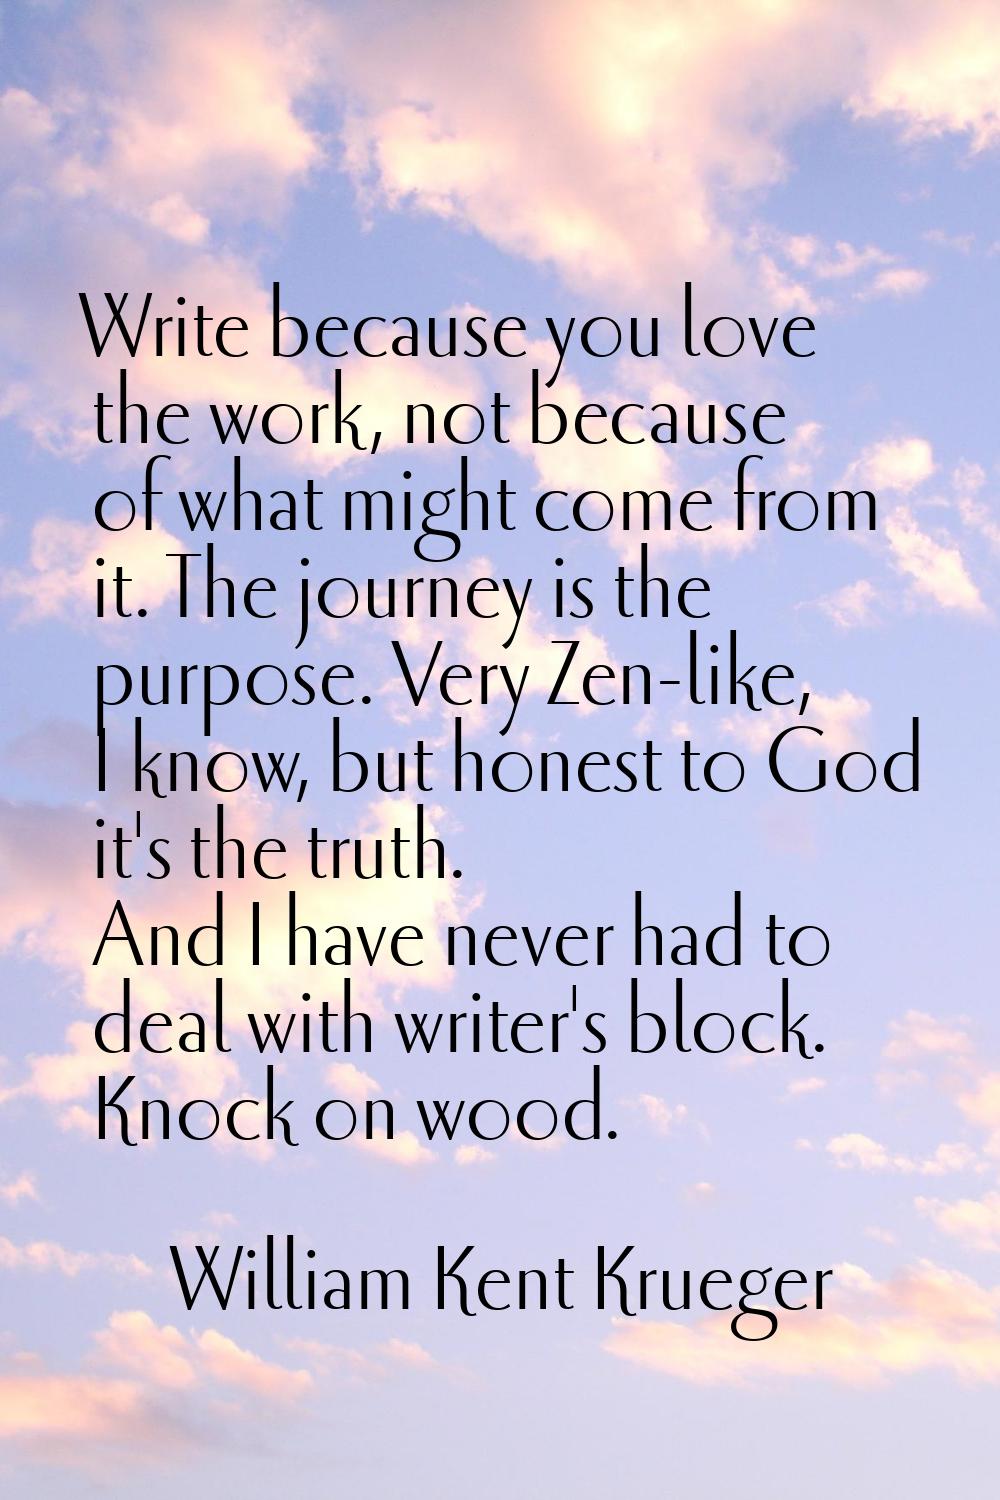 Write because you love the work, not because of what might come from it. The journey is the purpose